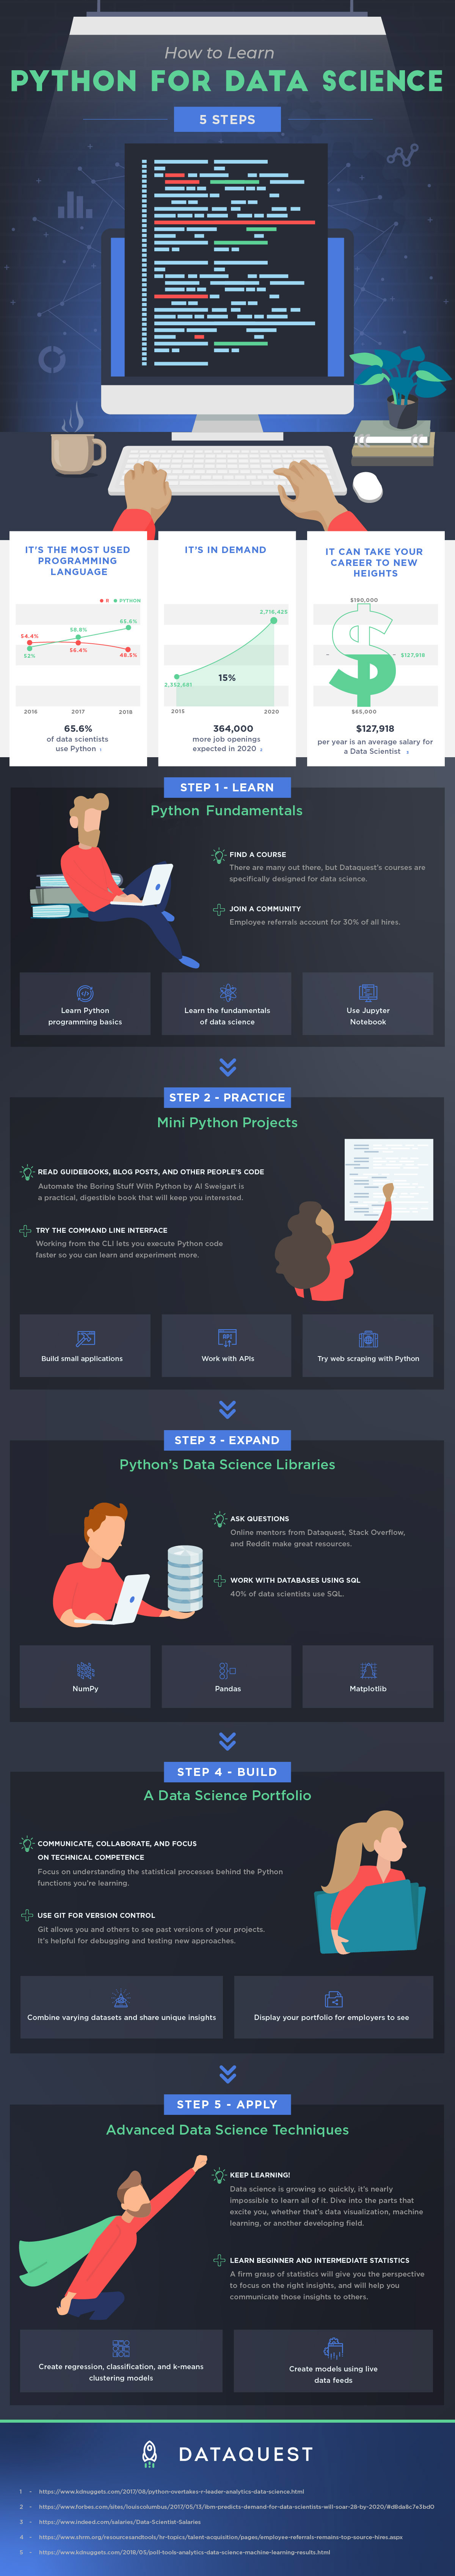 How to Learn Python for Data Science In 5 Steps